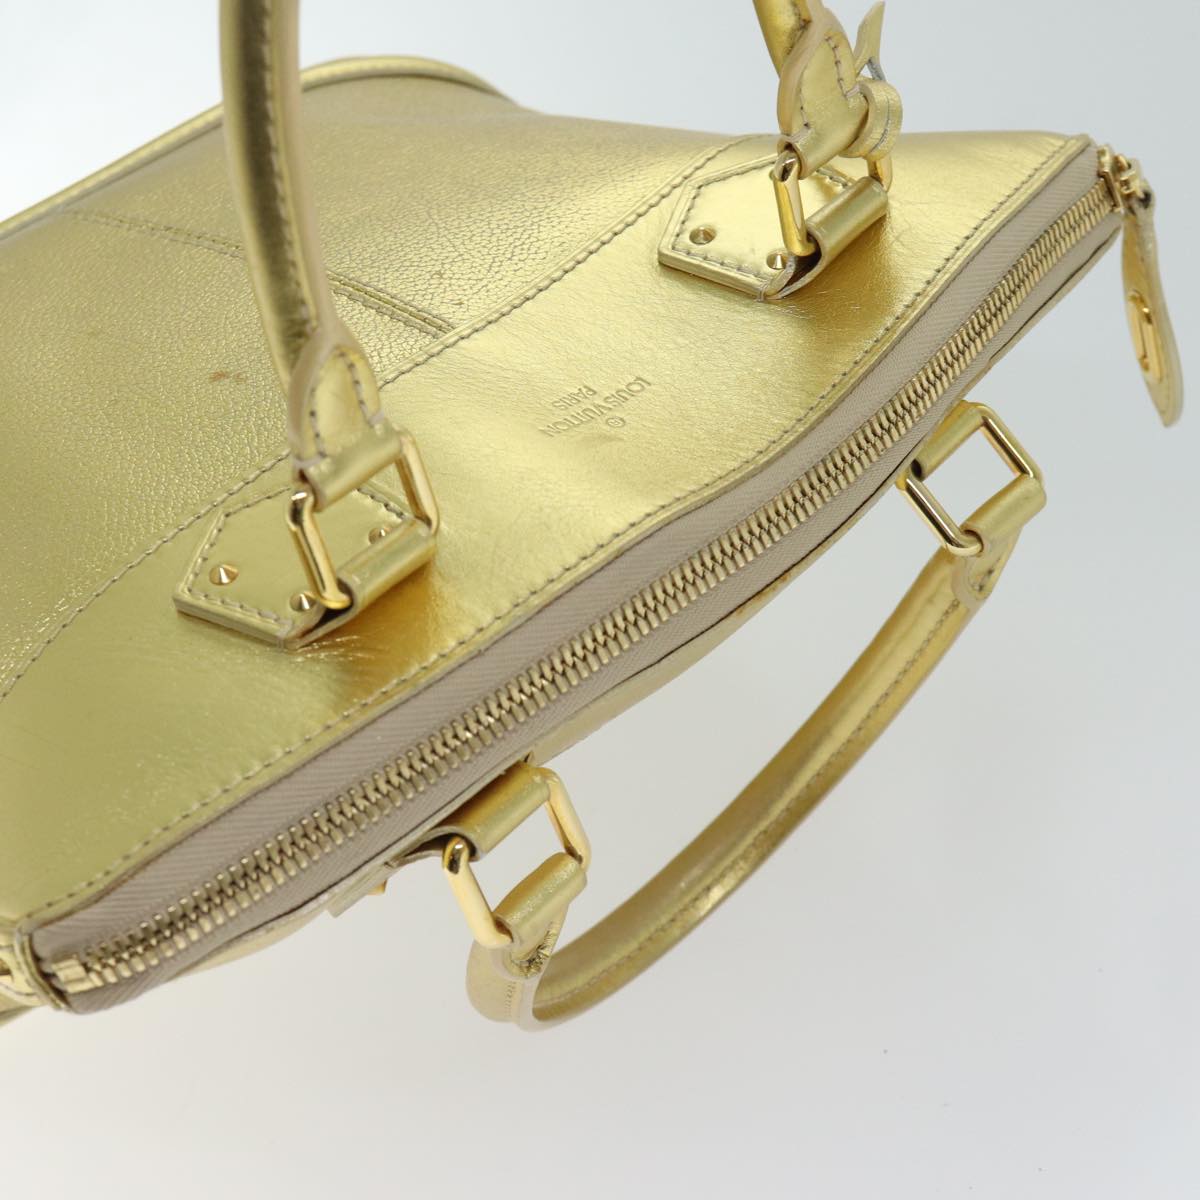 LOUIS VUITTON Suhari Lockit PM Hand Bag Leather Gold All M95433 LV Auth 71447